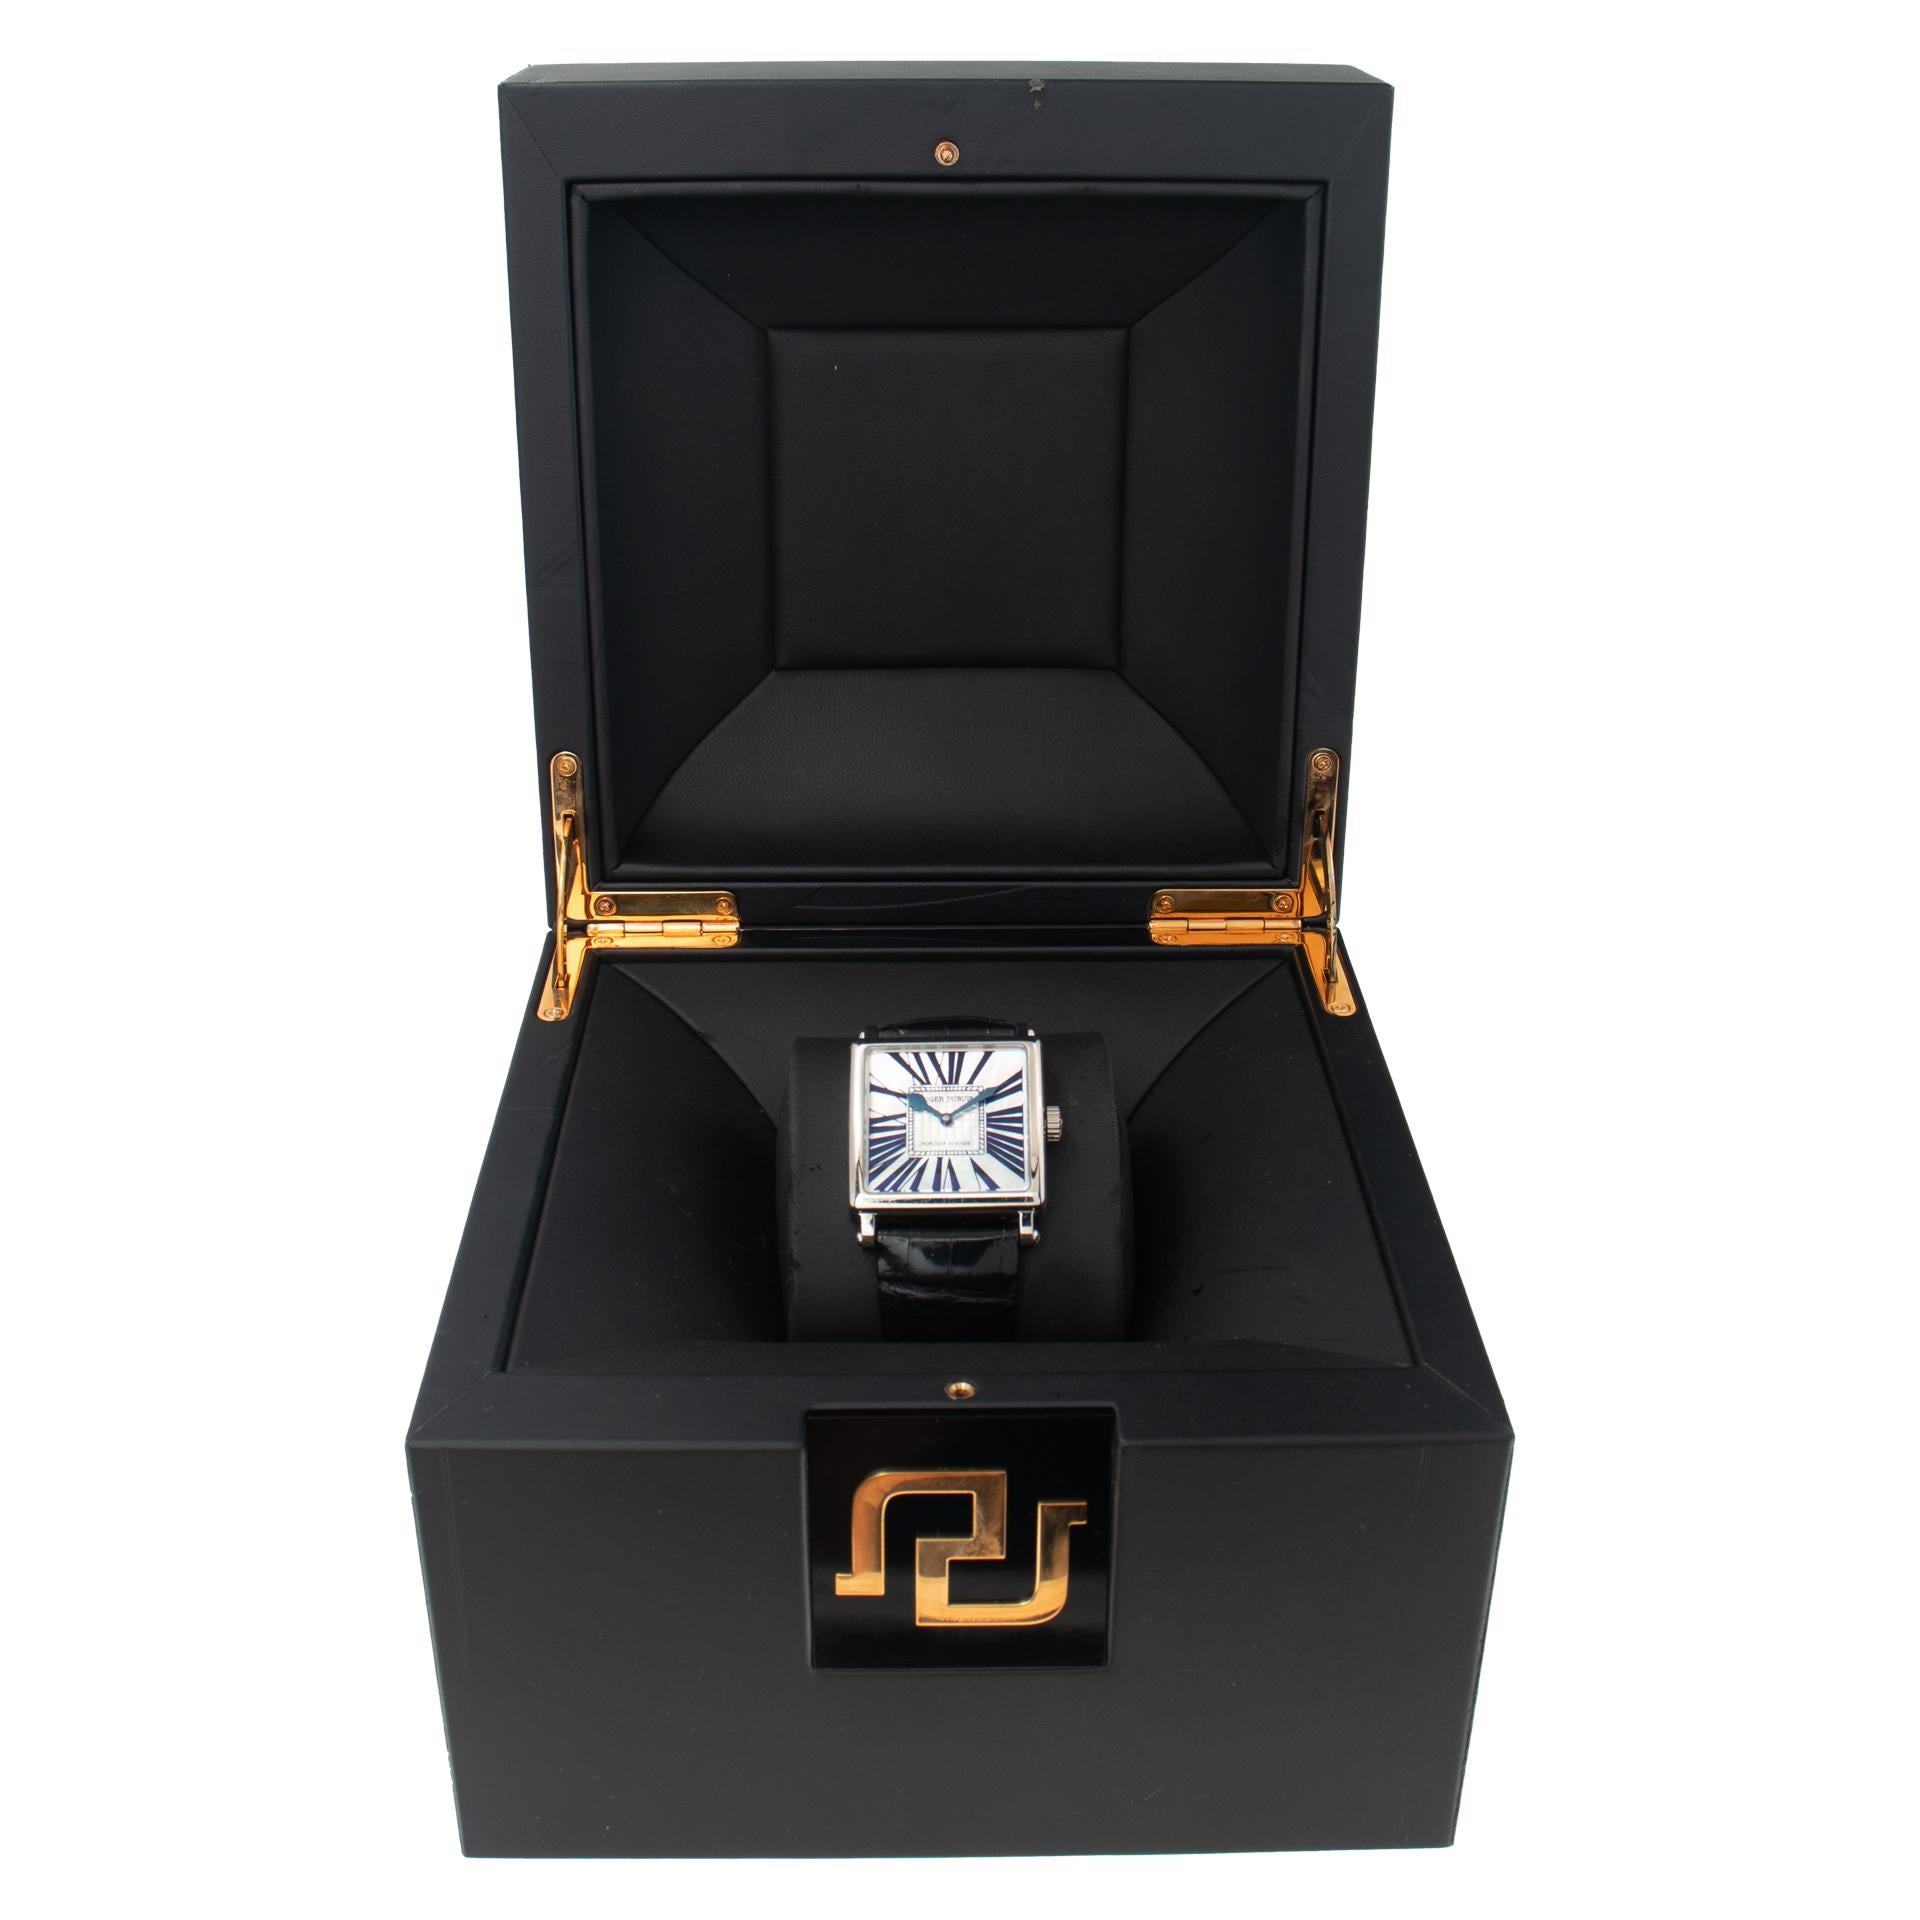 Roger Dubuis Golden Square 18k white gold watch Ref DBGS0322 For Sale 1